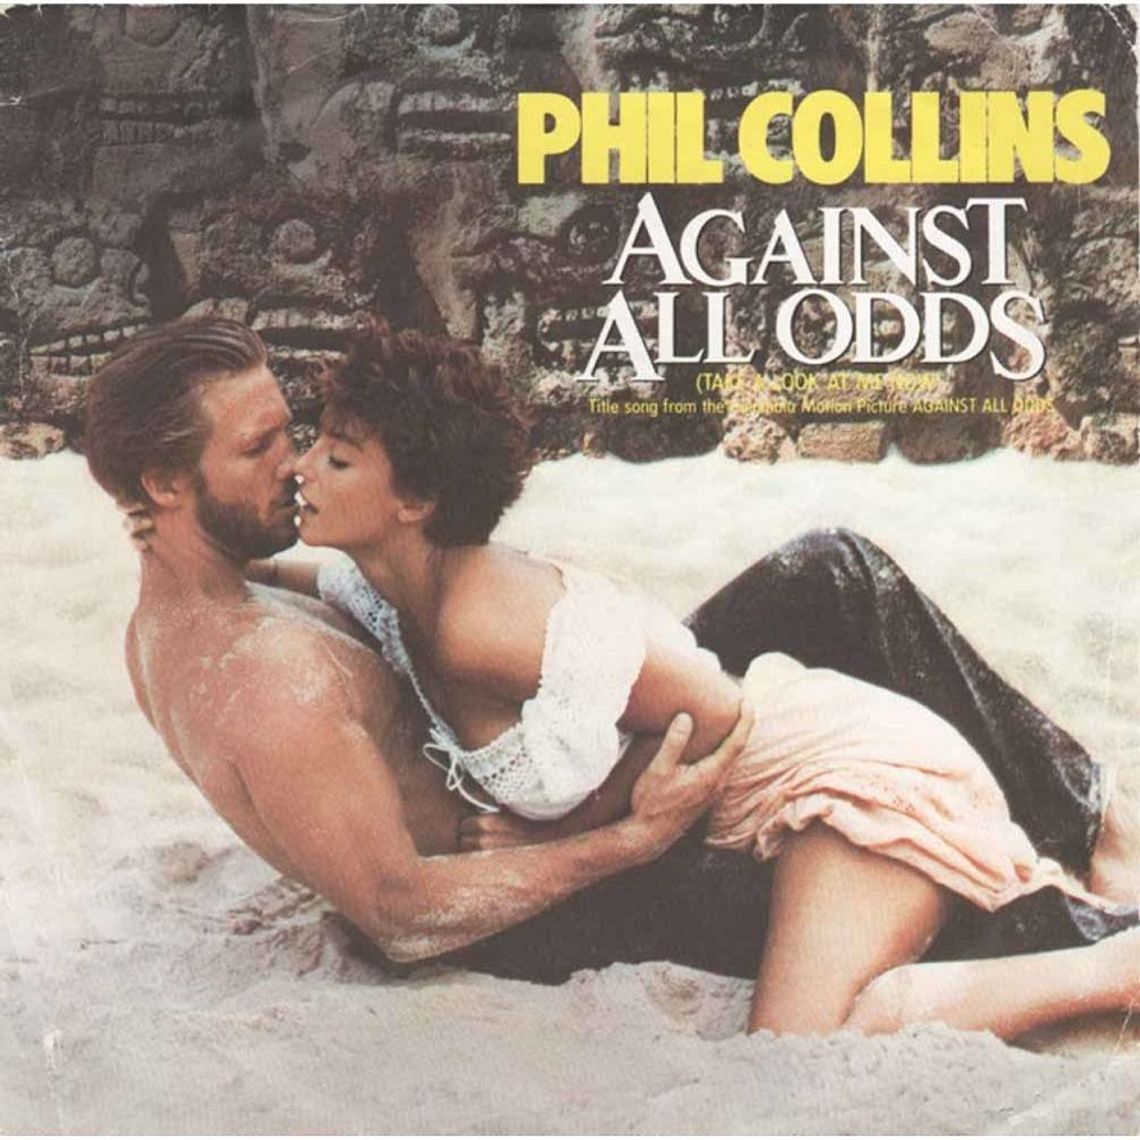 PHIL COLLINS "Against all odds"